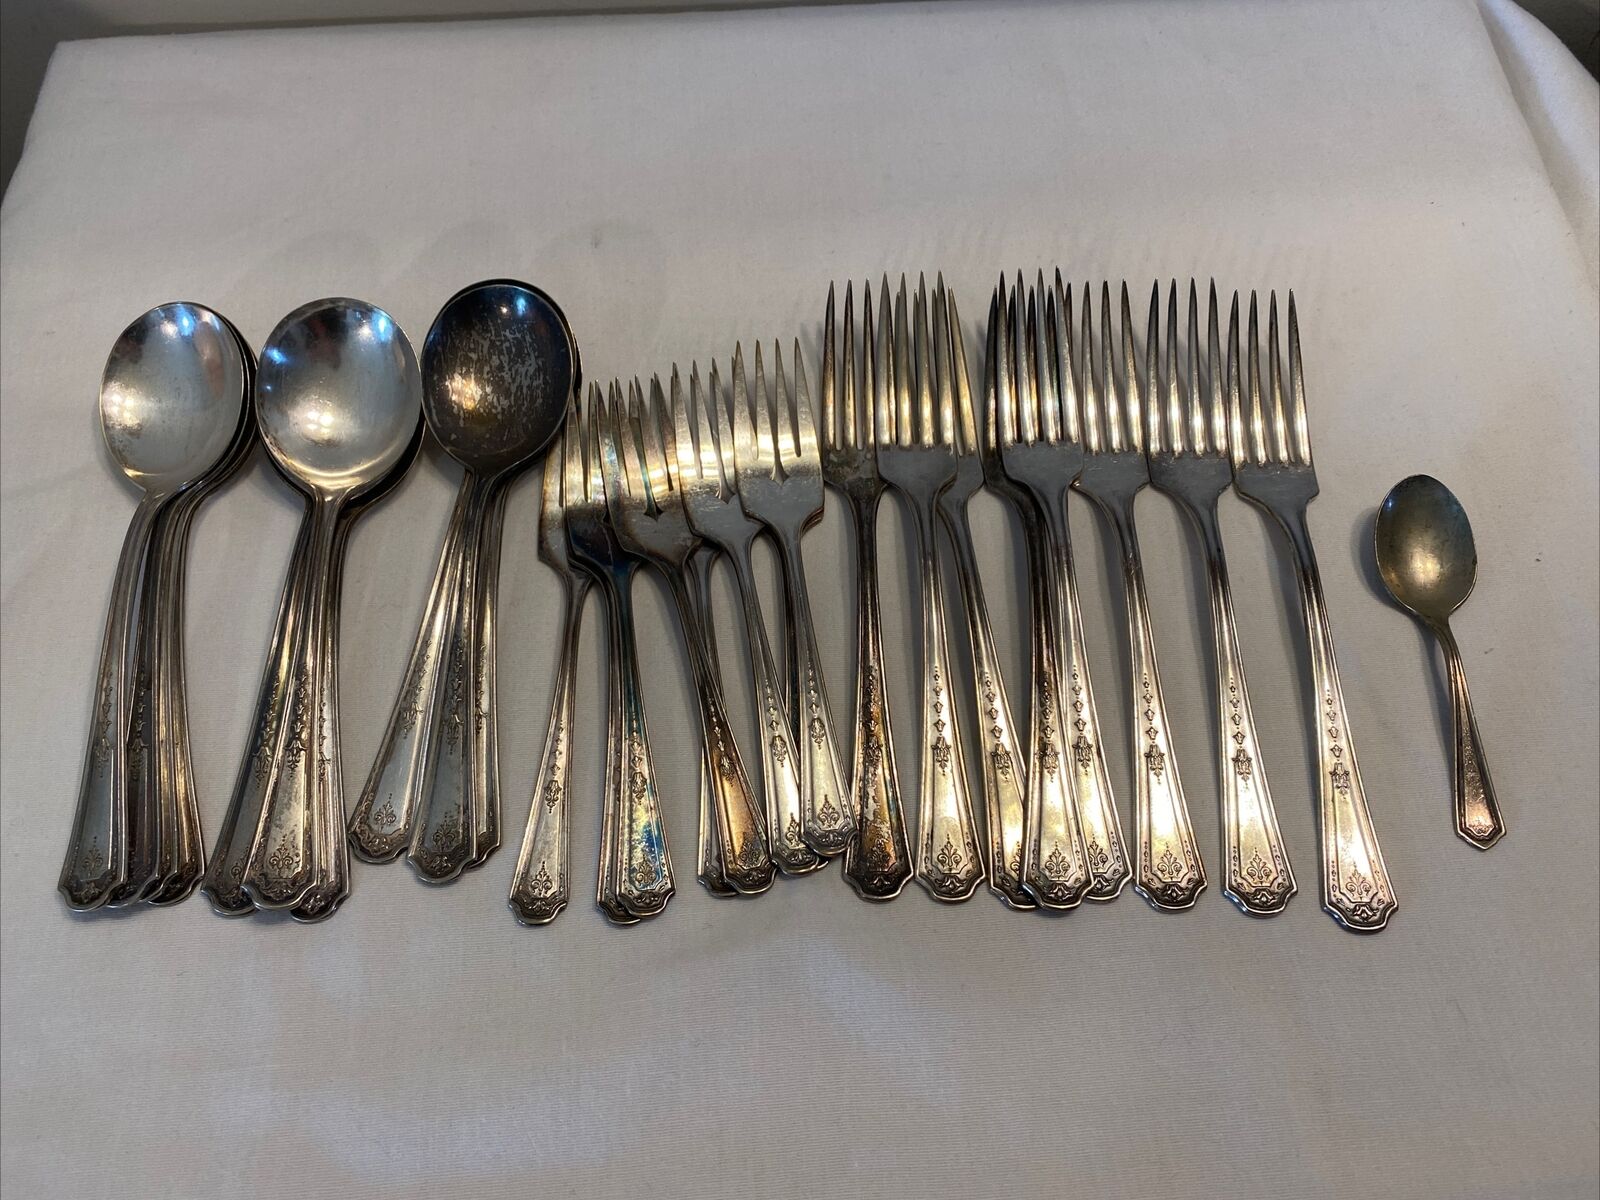 Vintage Glenmore Spoons & Forks By Madison Silver Plate 28 pcs